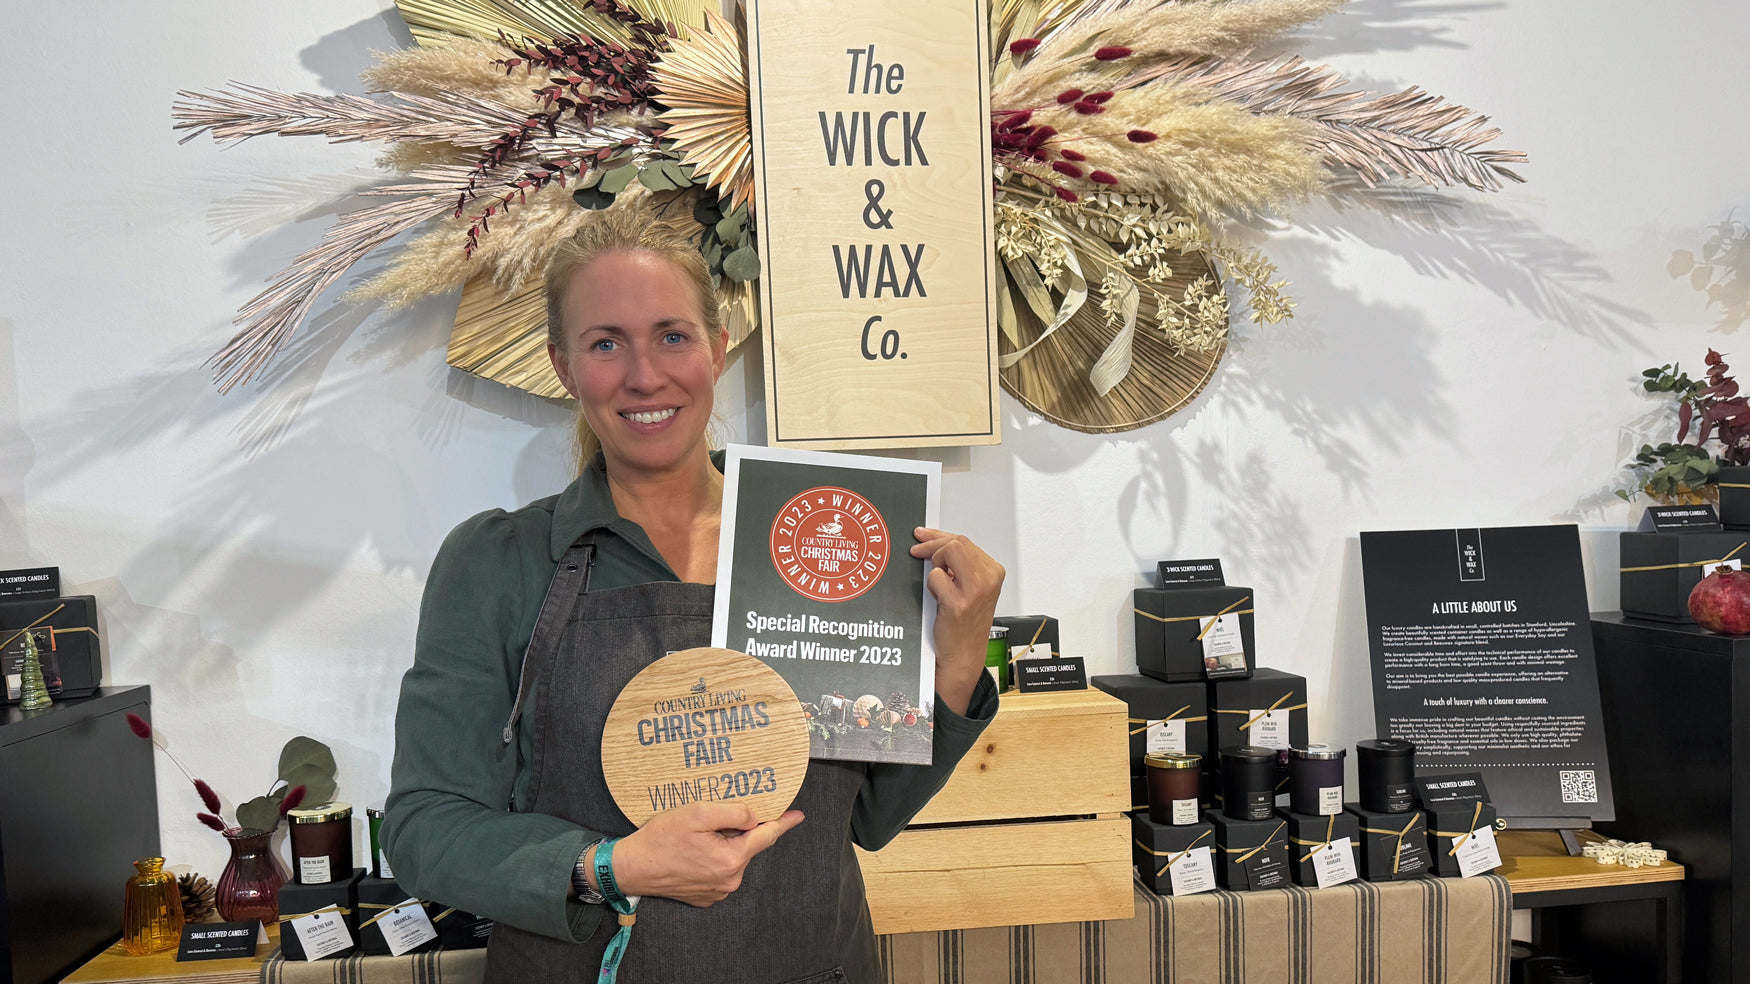 Country Living - Meet The Maker Interview with Sasha Olsen, Founder of The Wick & Wax Co.